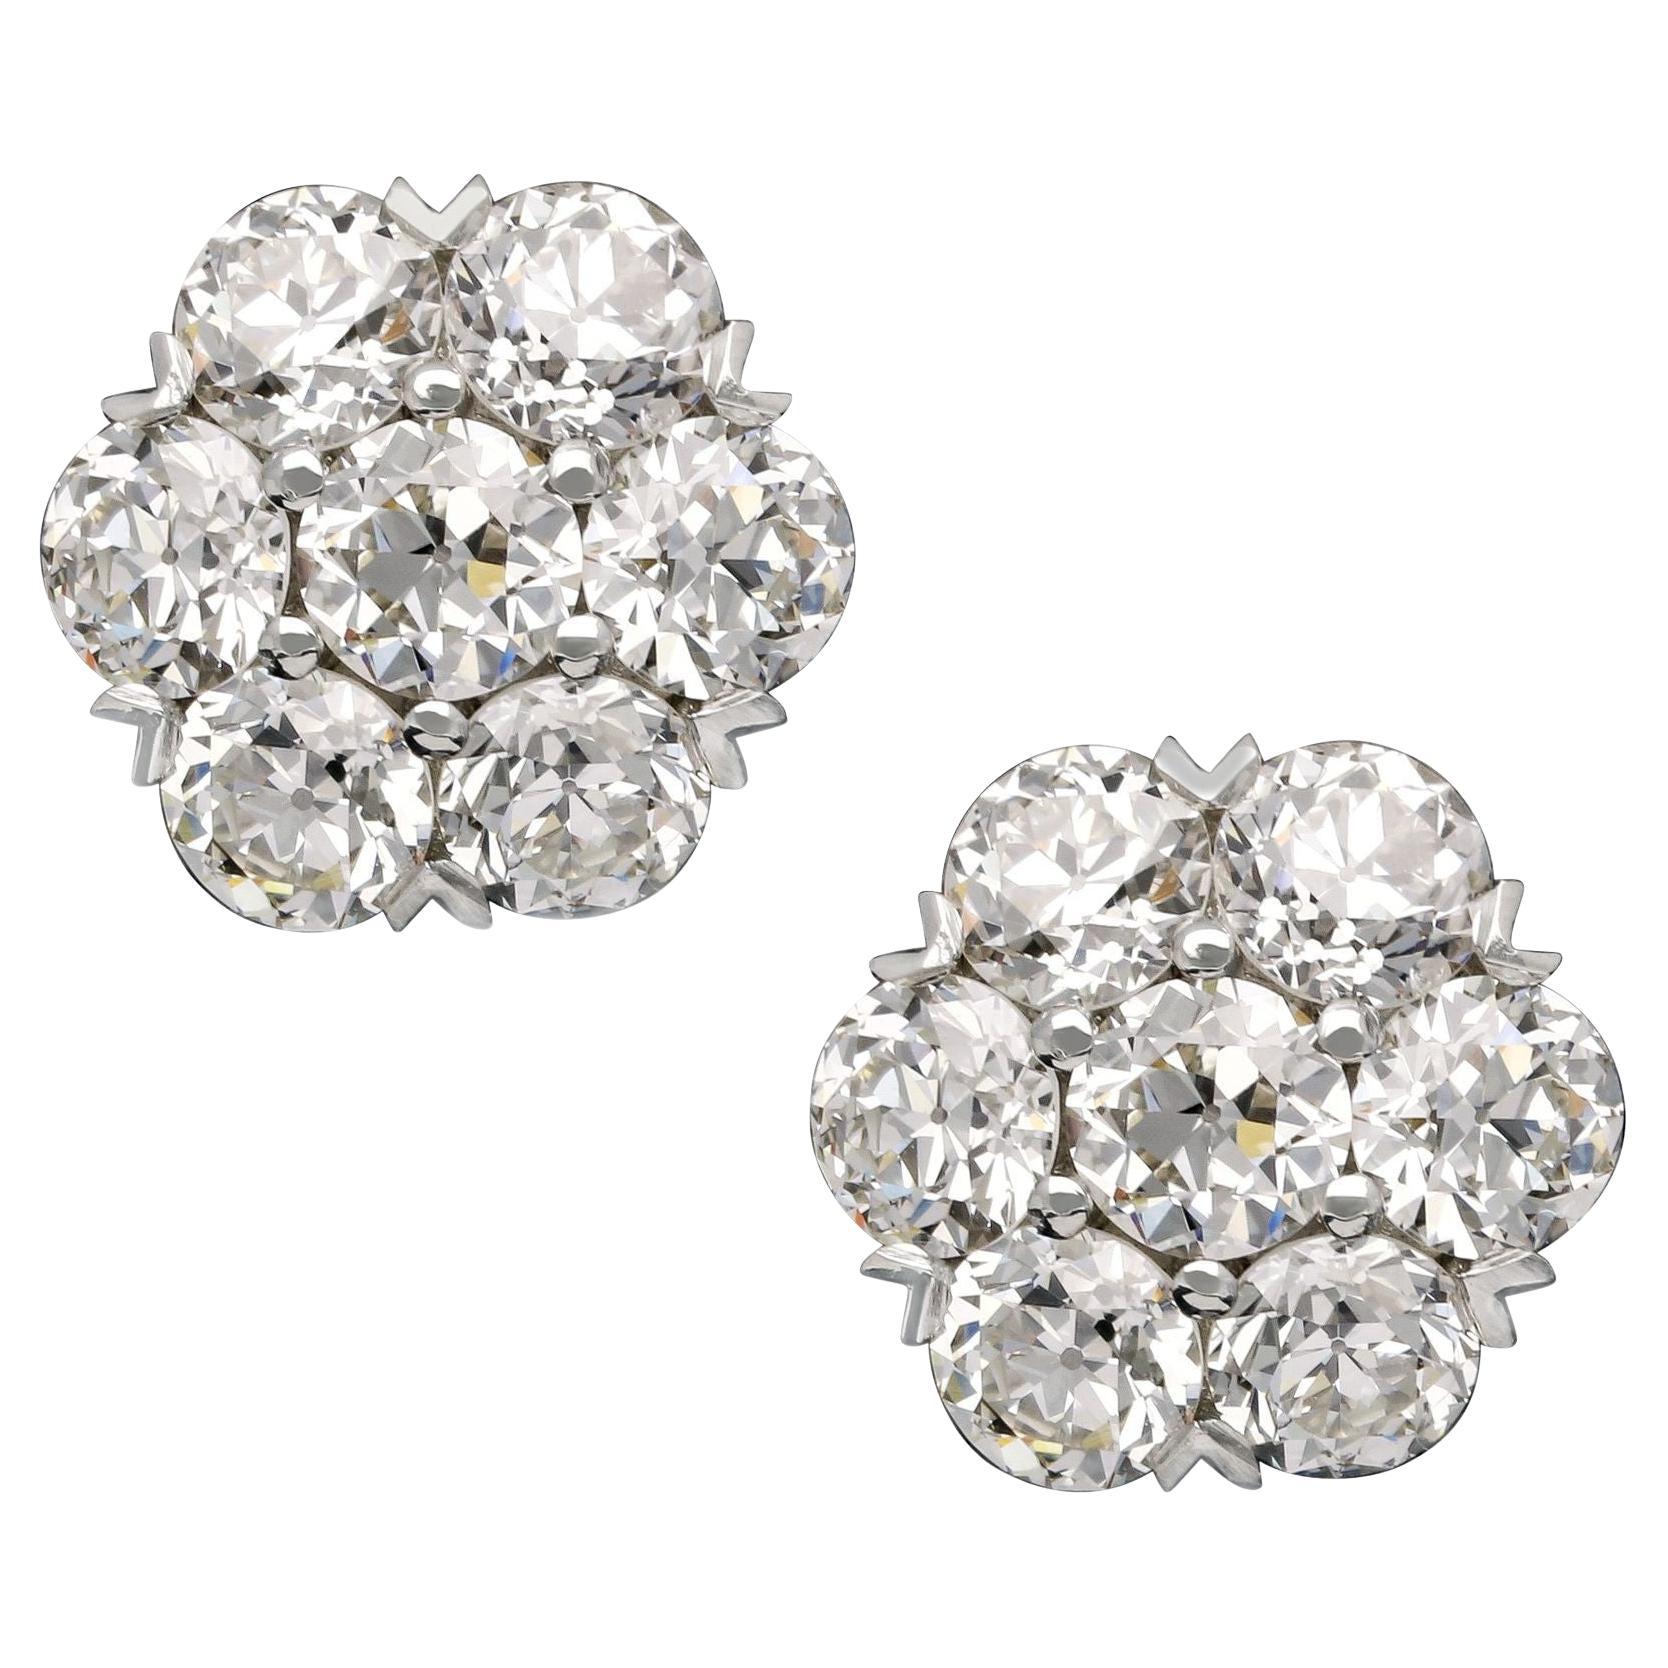 Important Victorian Old European Cut Diamond Cluster Earrings at 1stDibs